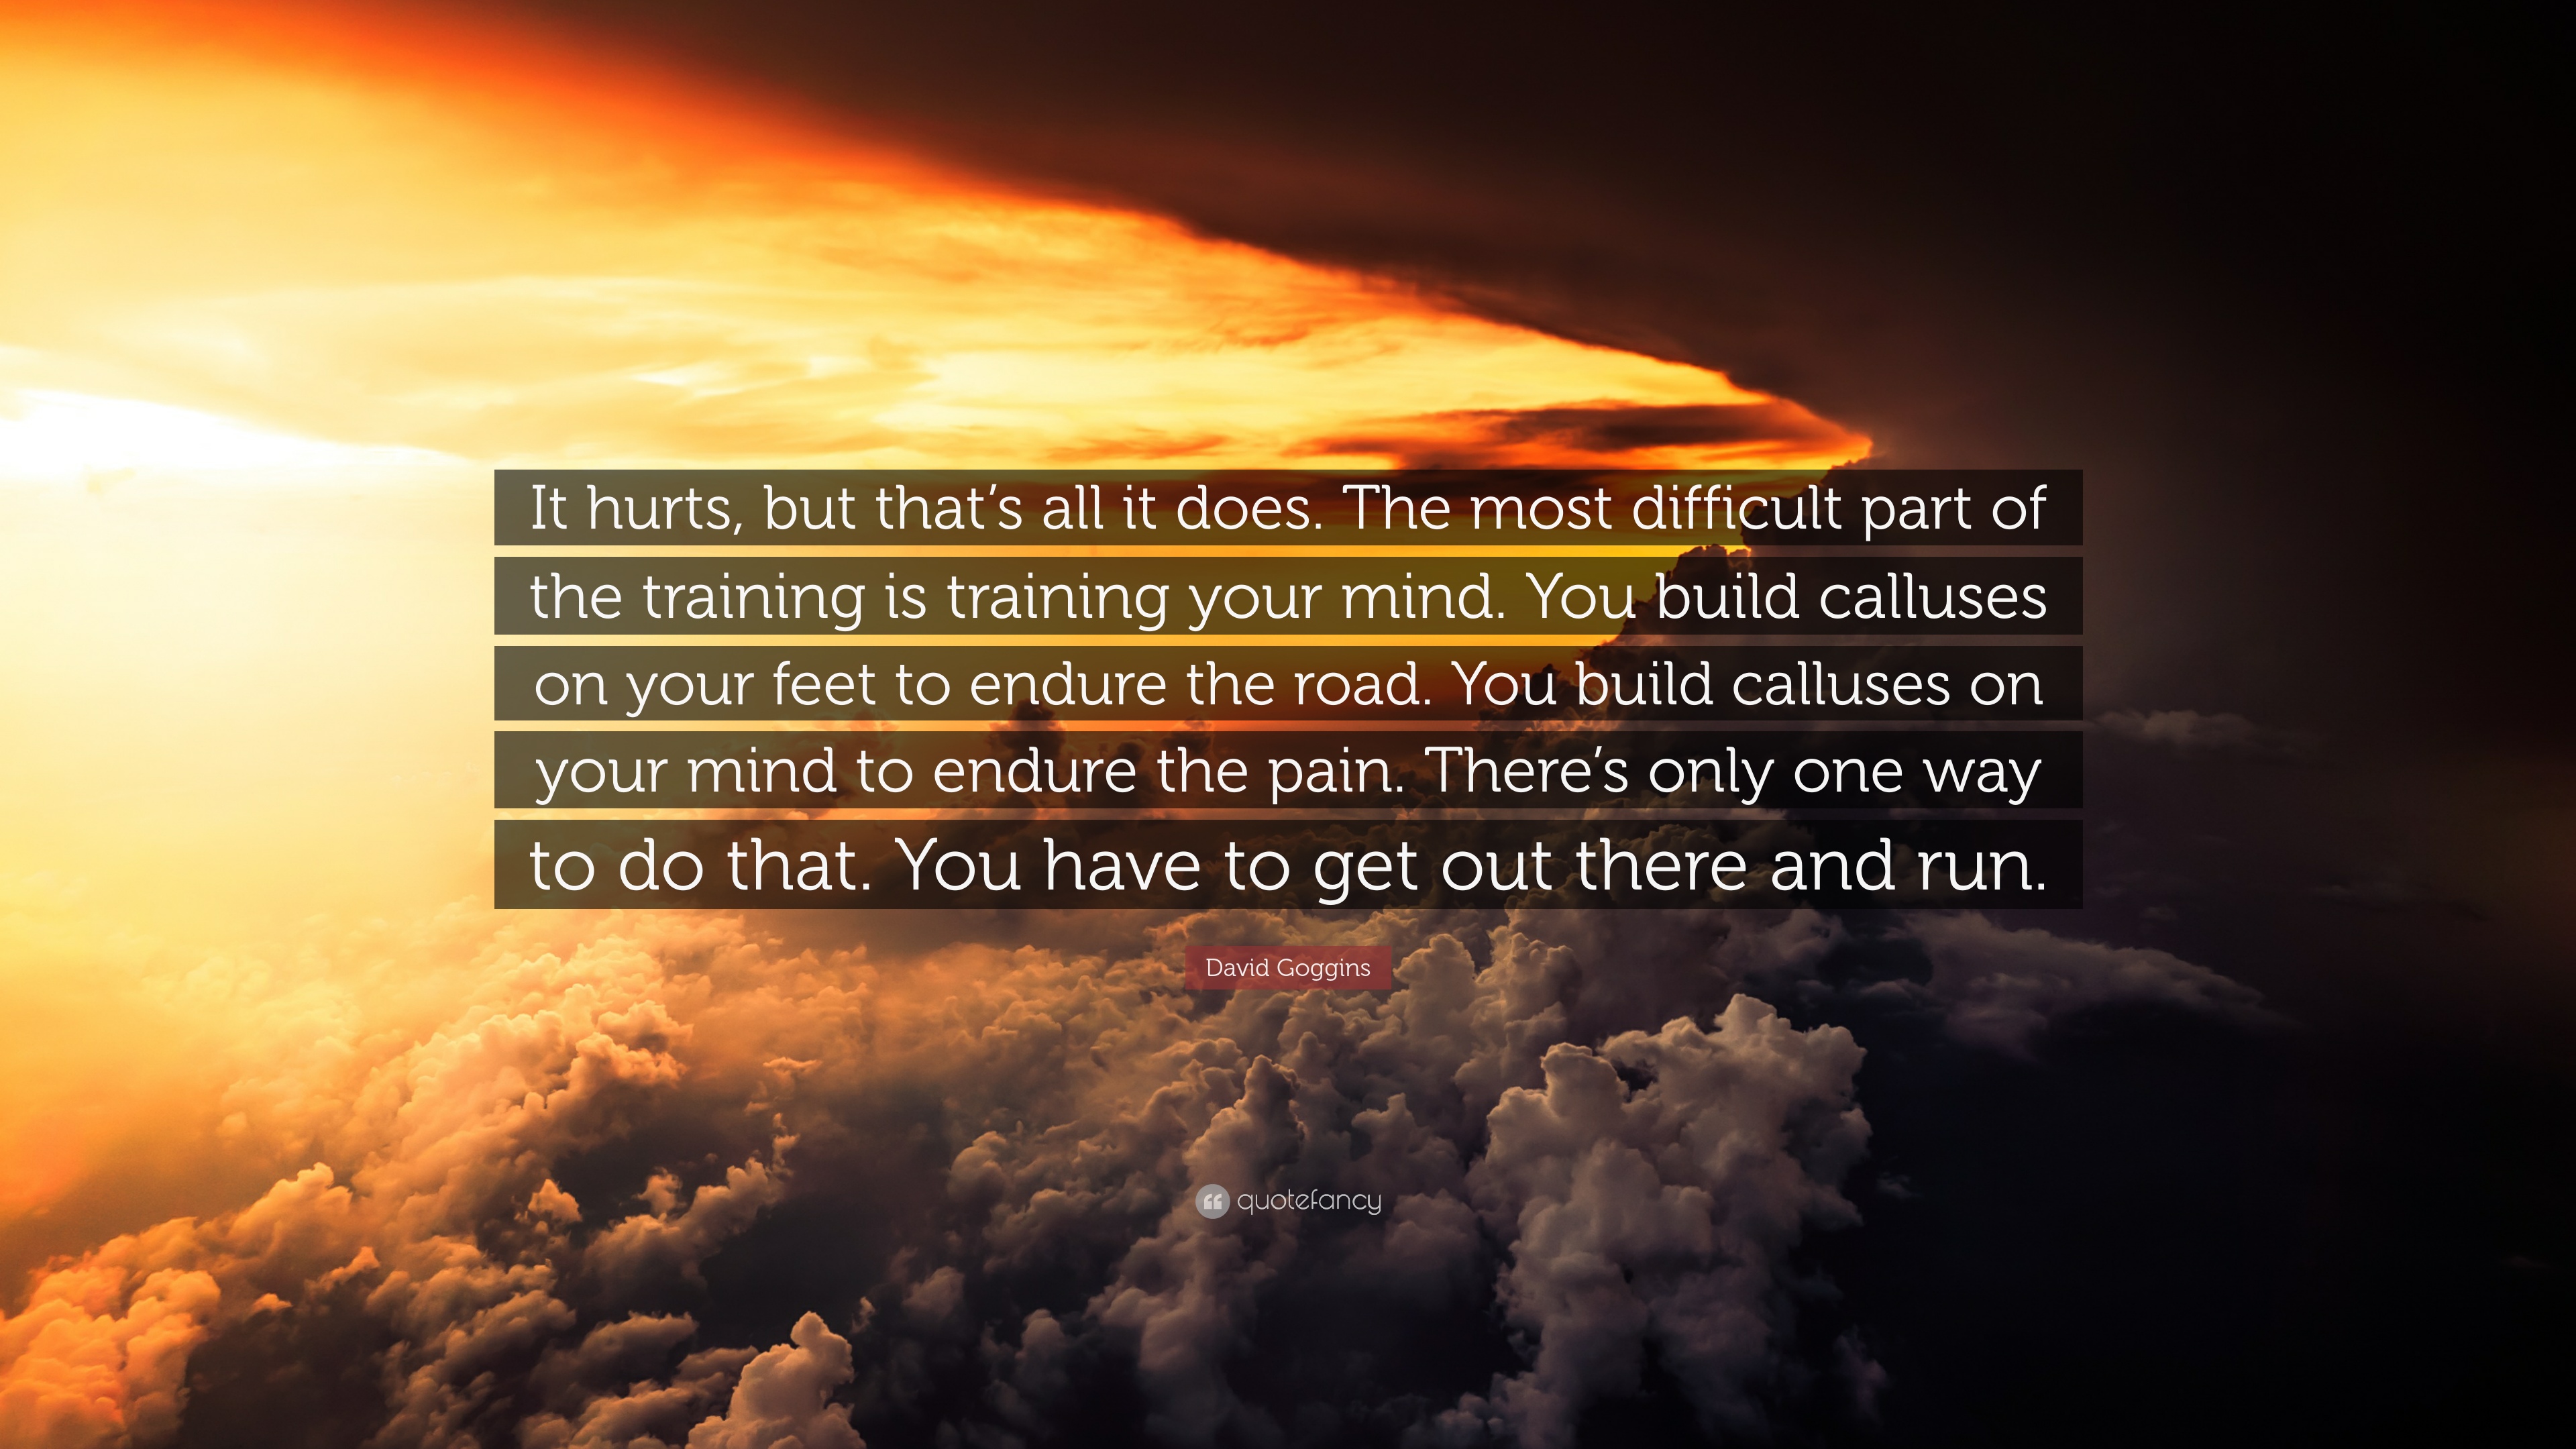 David Goggins Quote: “It hurts, but that's all it does